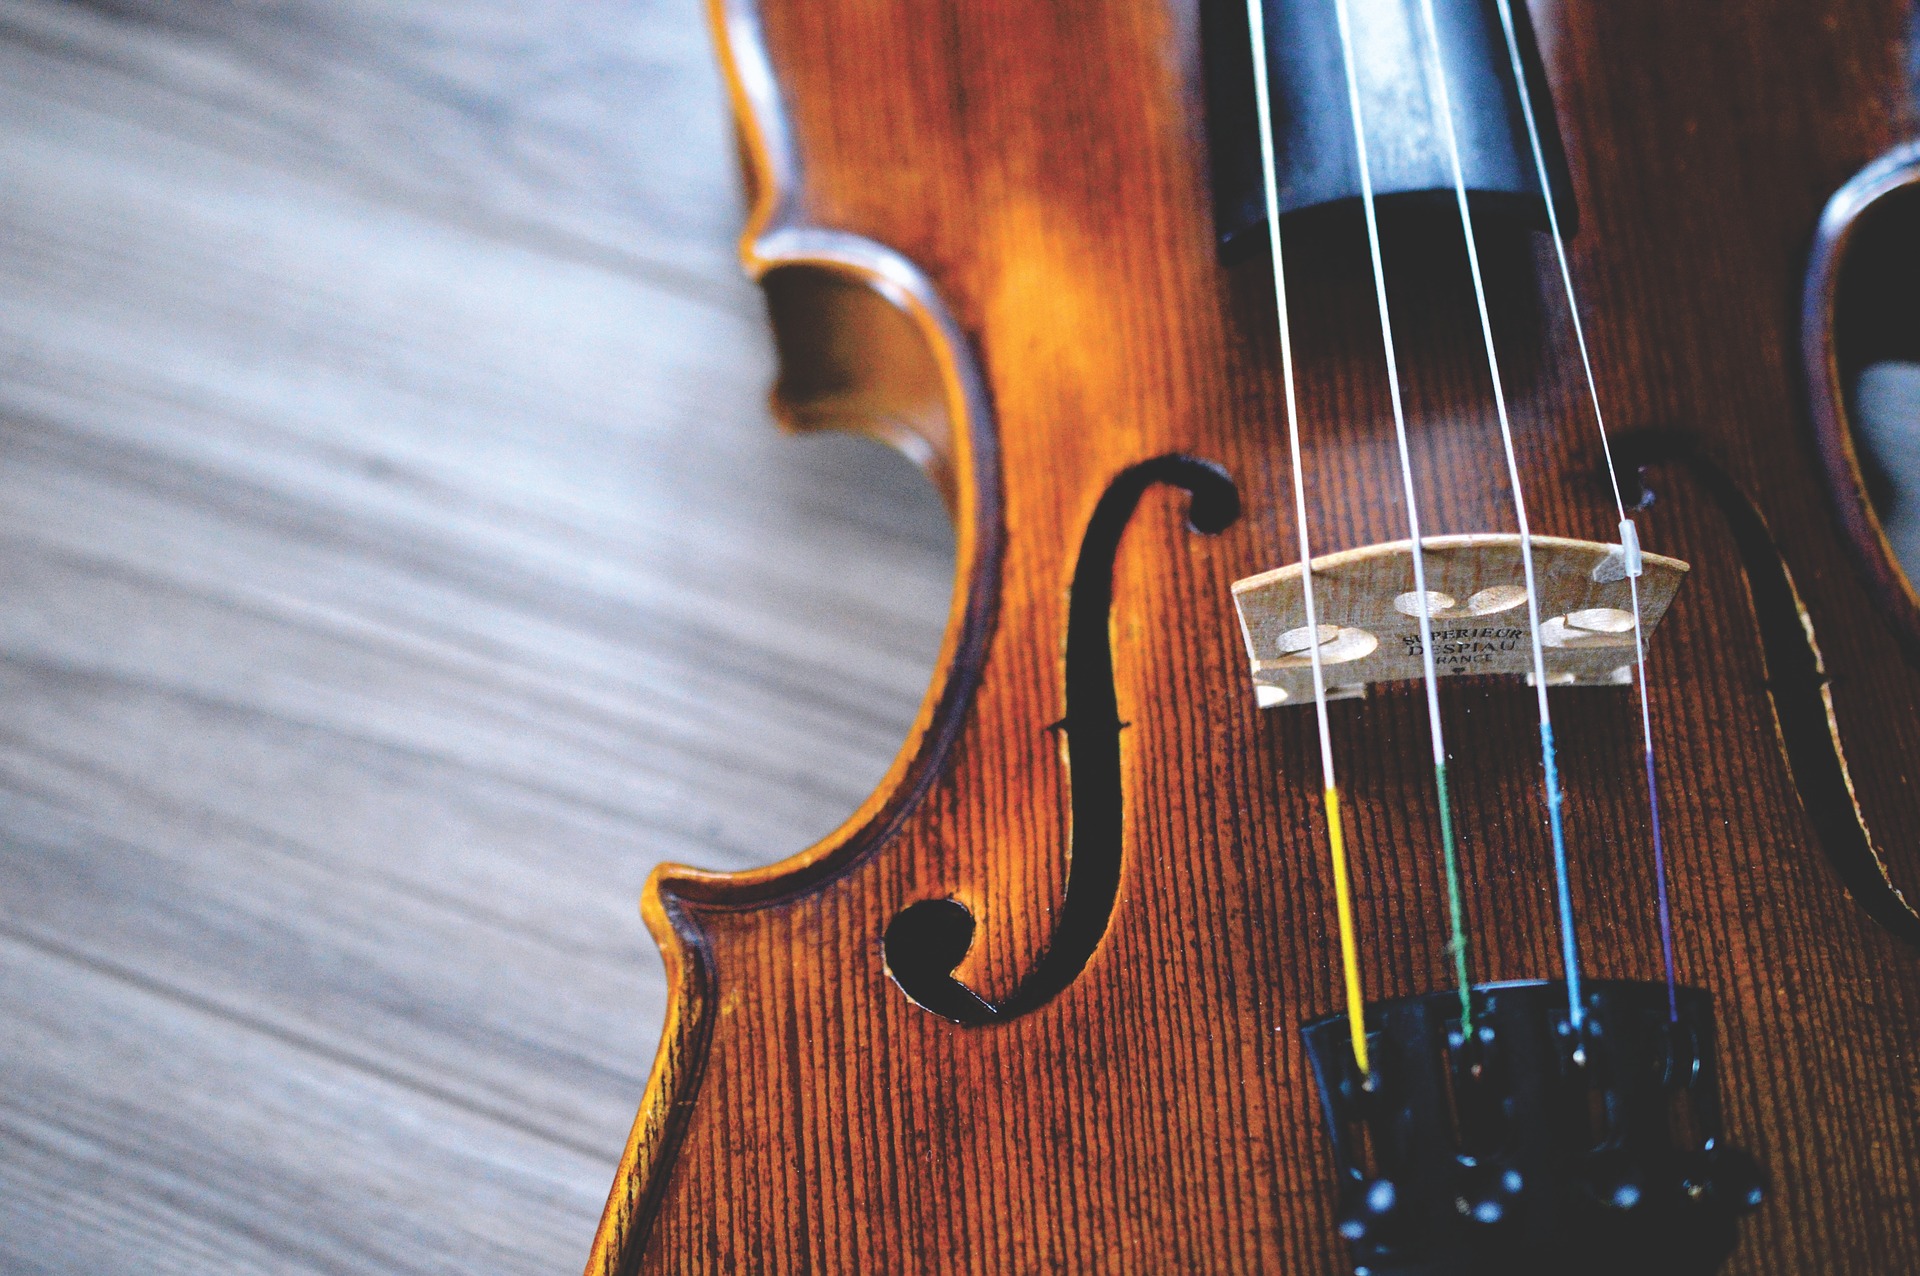 close up image of a violin showing mostly the middle of the left side of the instrument along with the strings